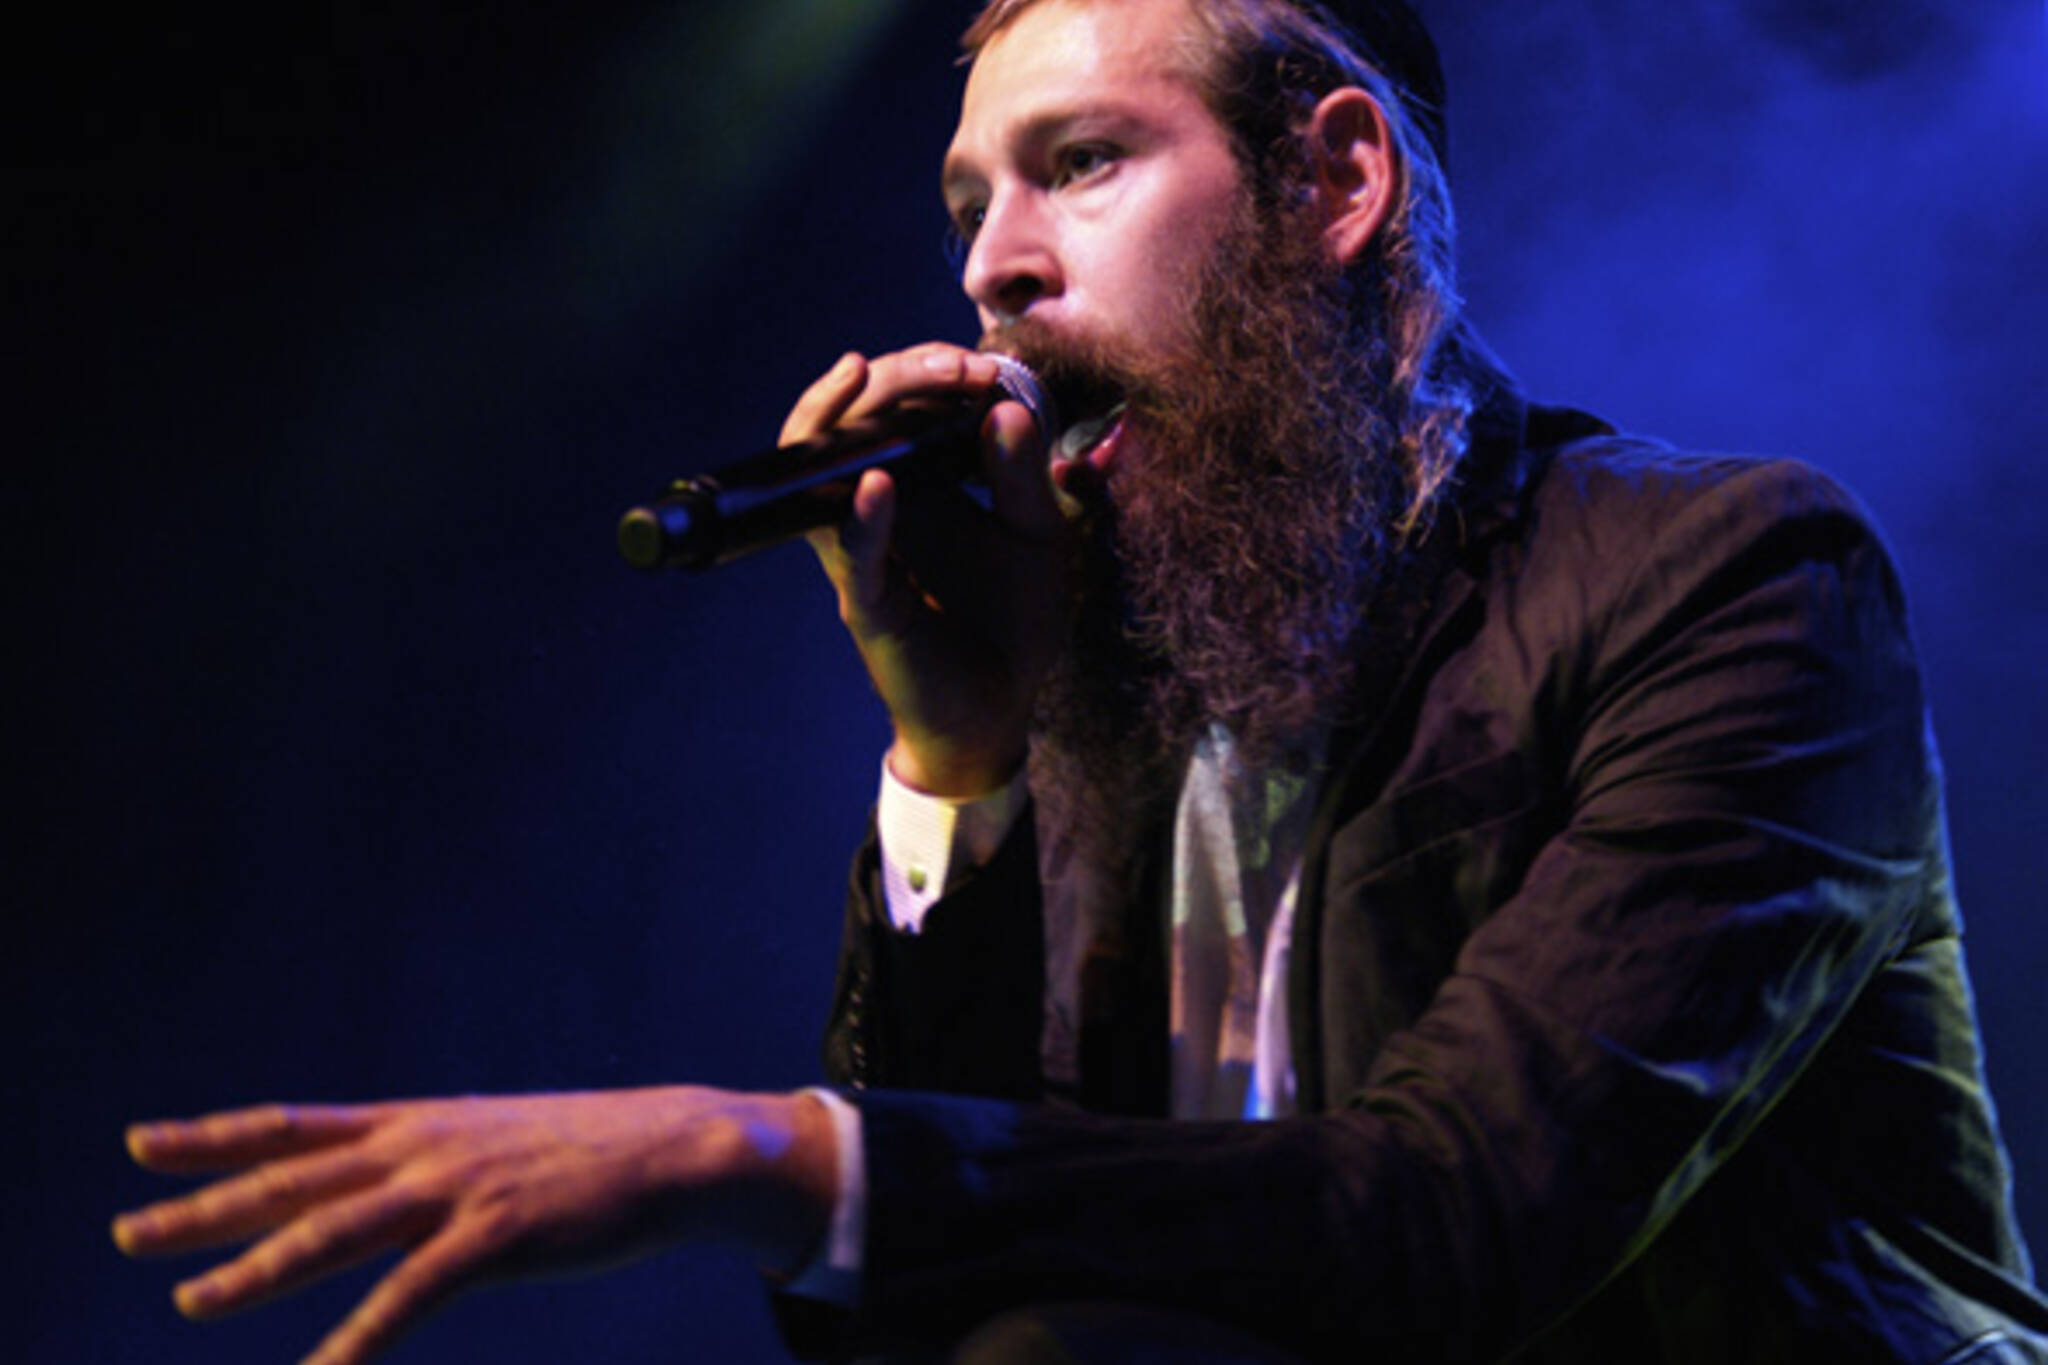 Matisyahu sings his brand of reggae music to a sold-out crowd at The Phoenix in Toronto